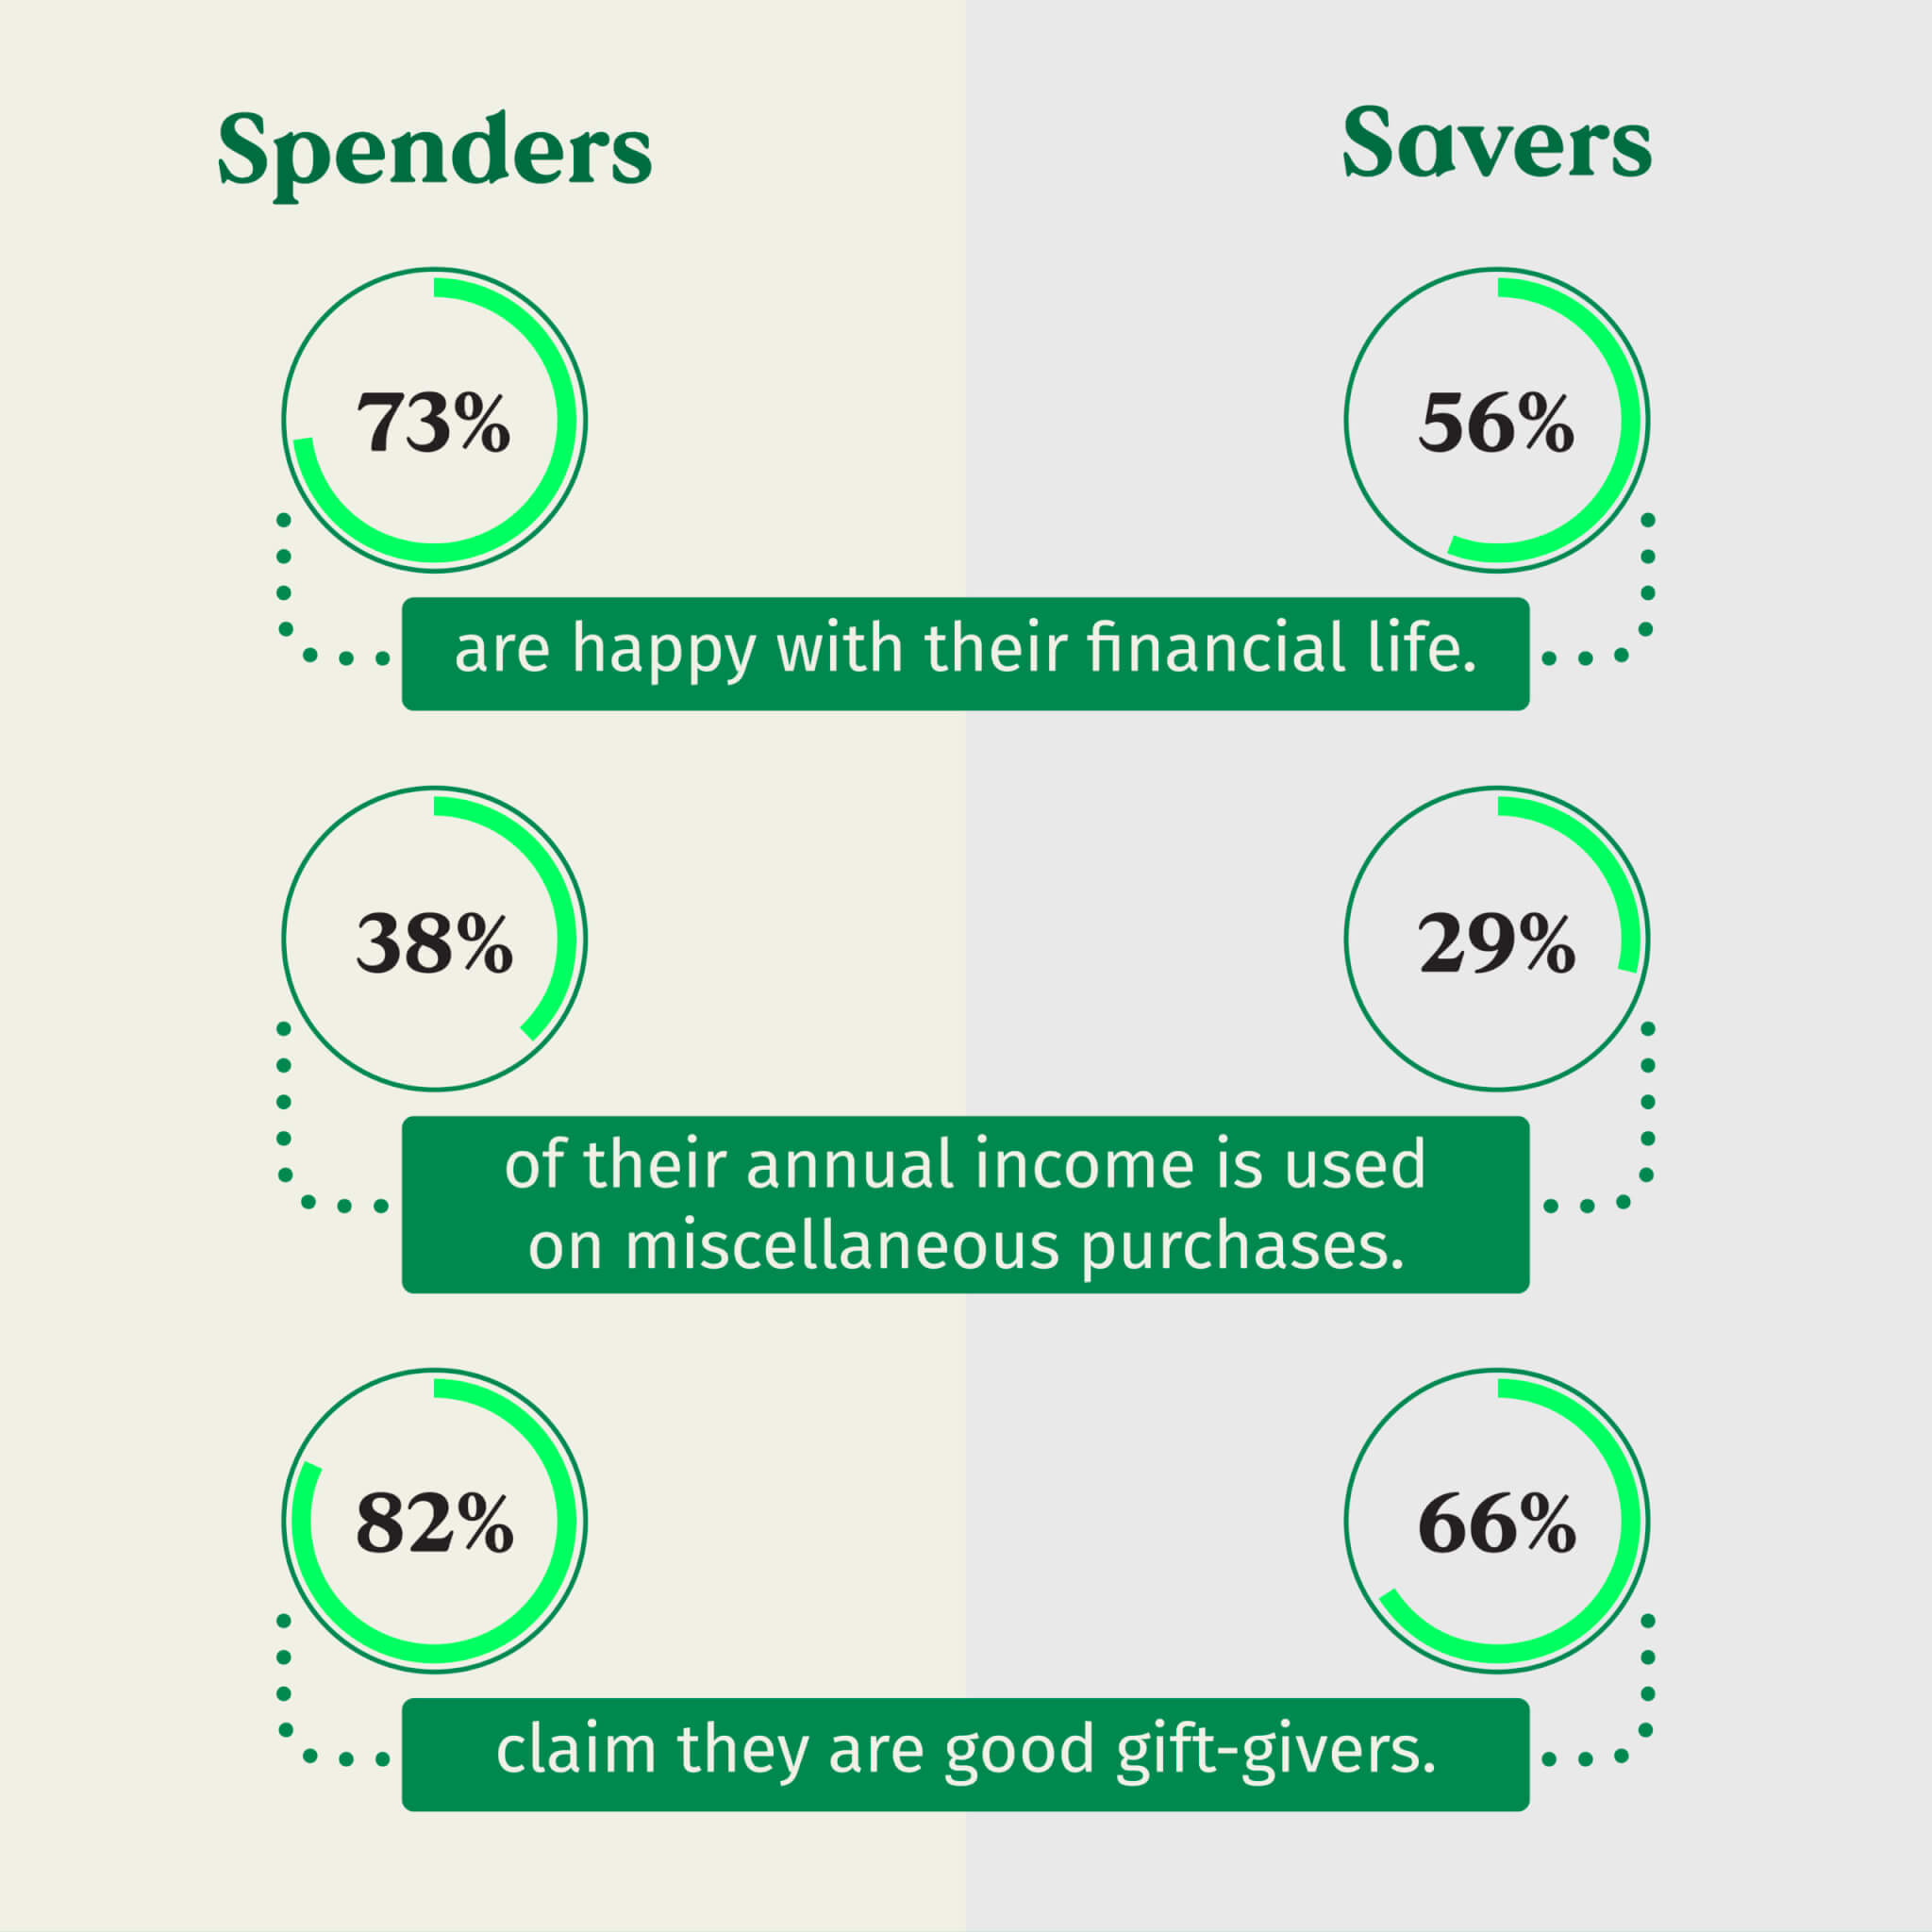 Infographic comparing spenders to savers.